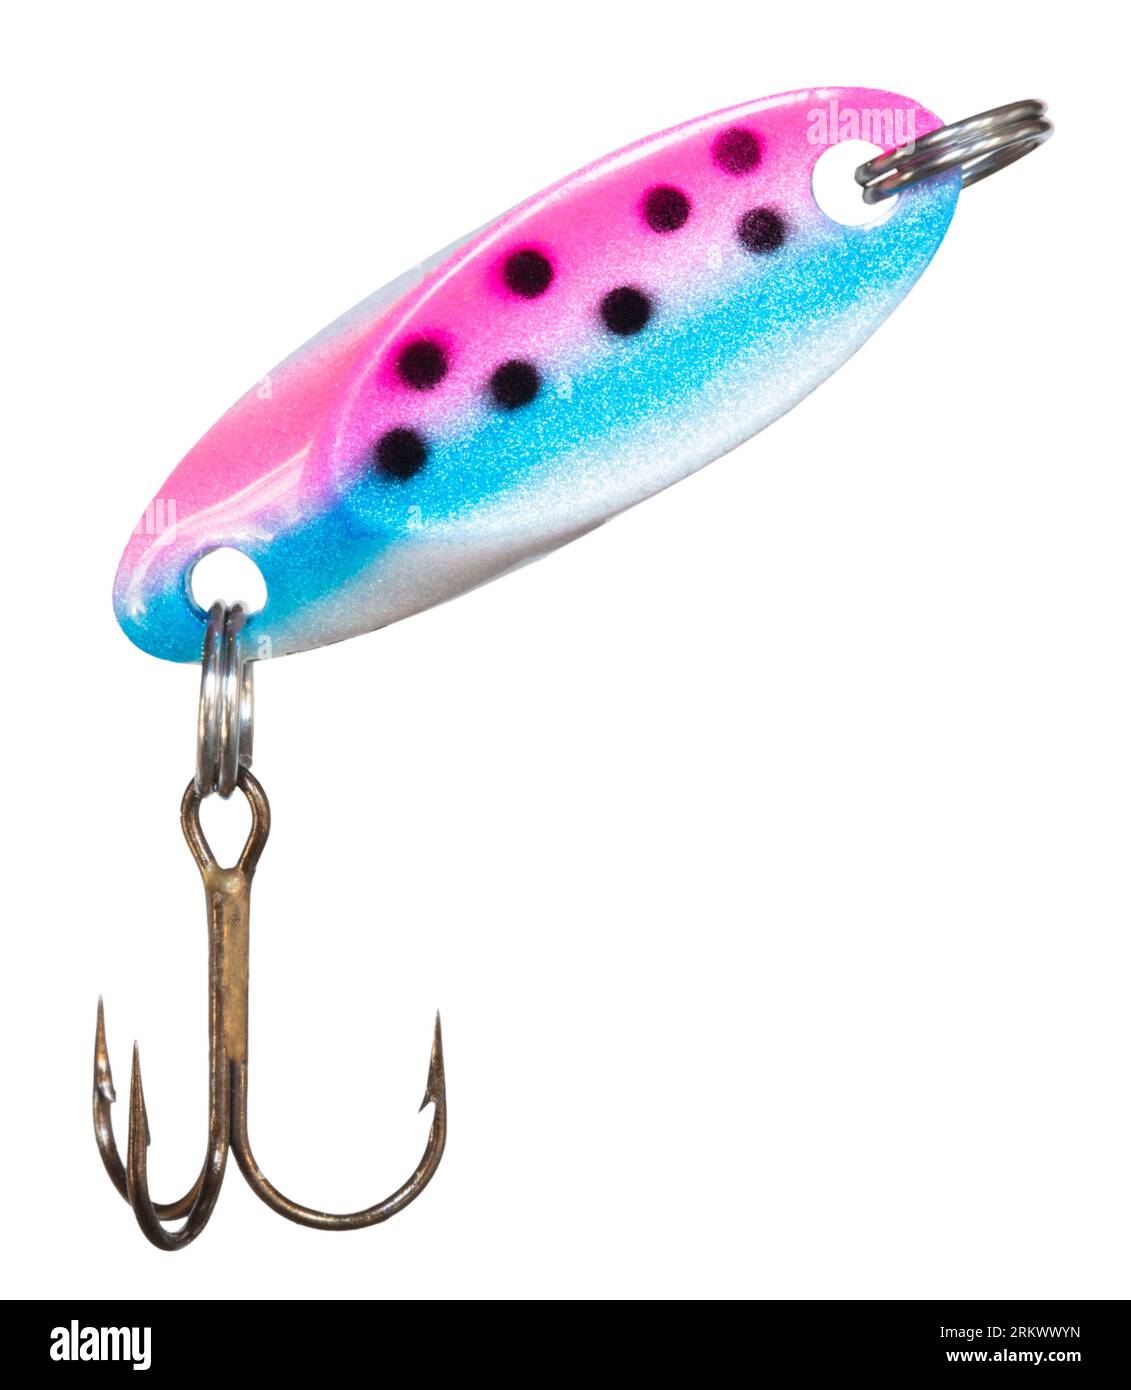 White, blue and pink fishing lure with spots and a single treble